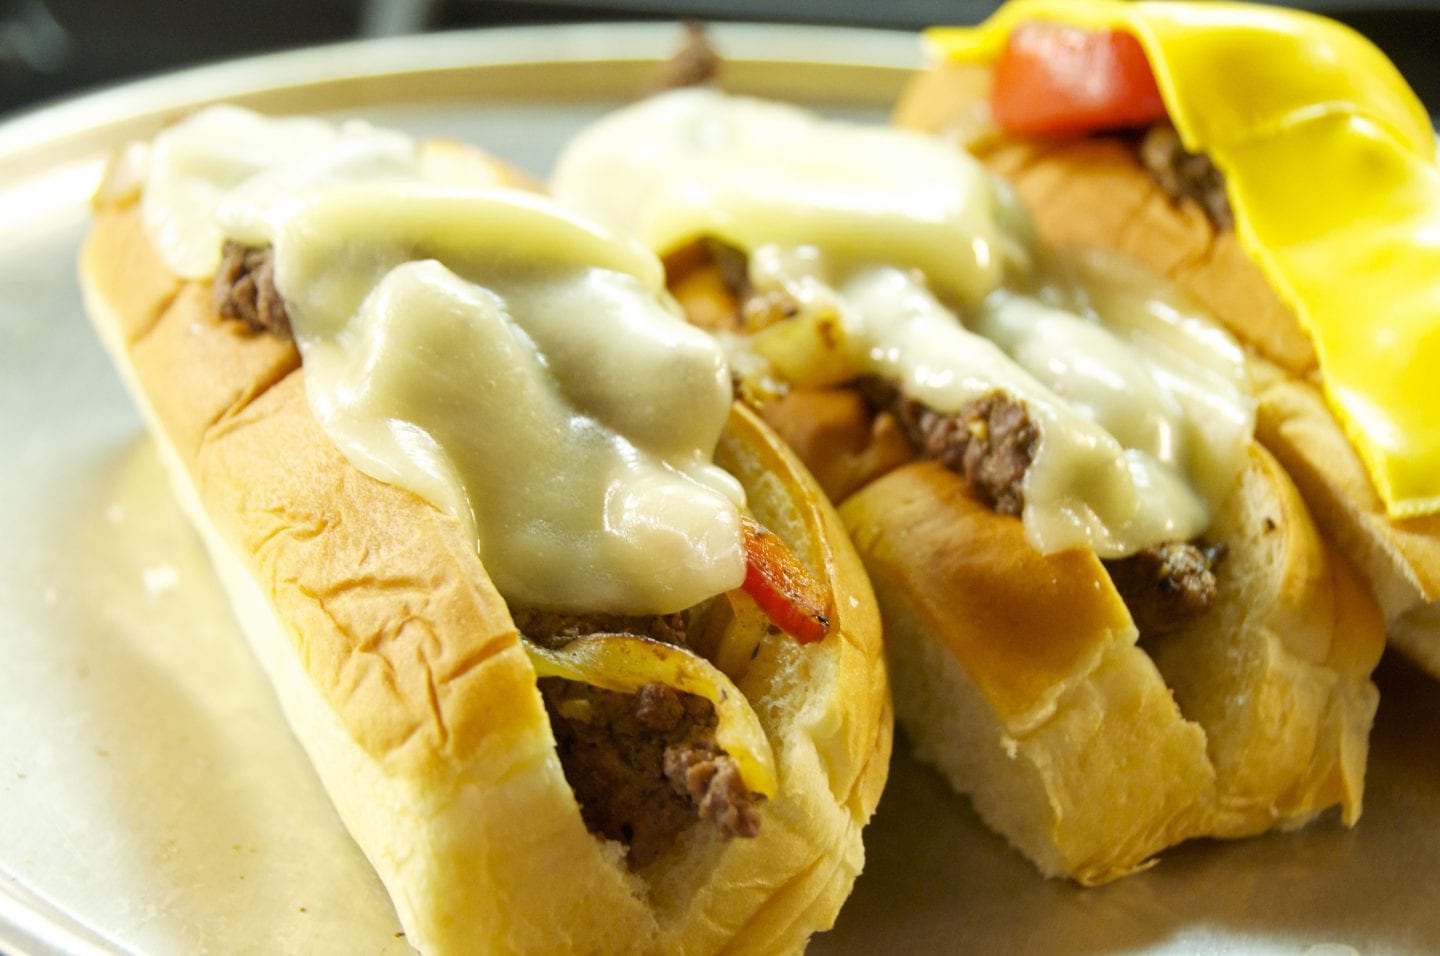 Philly Cheese cubed steak sandwiches